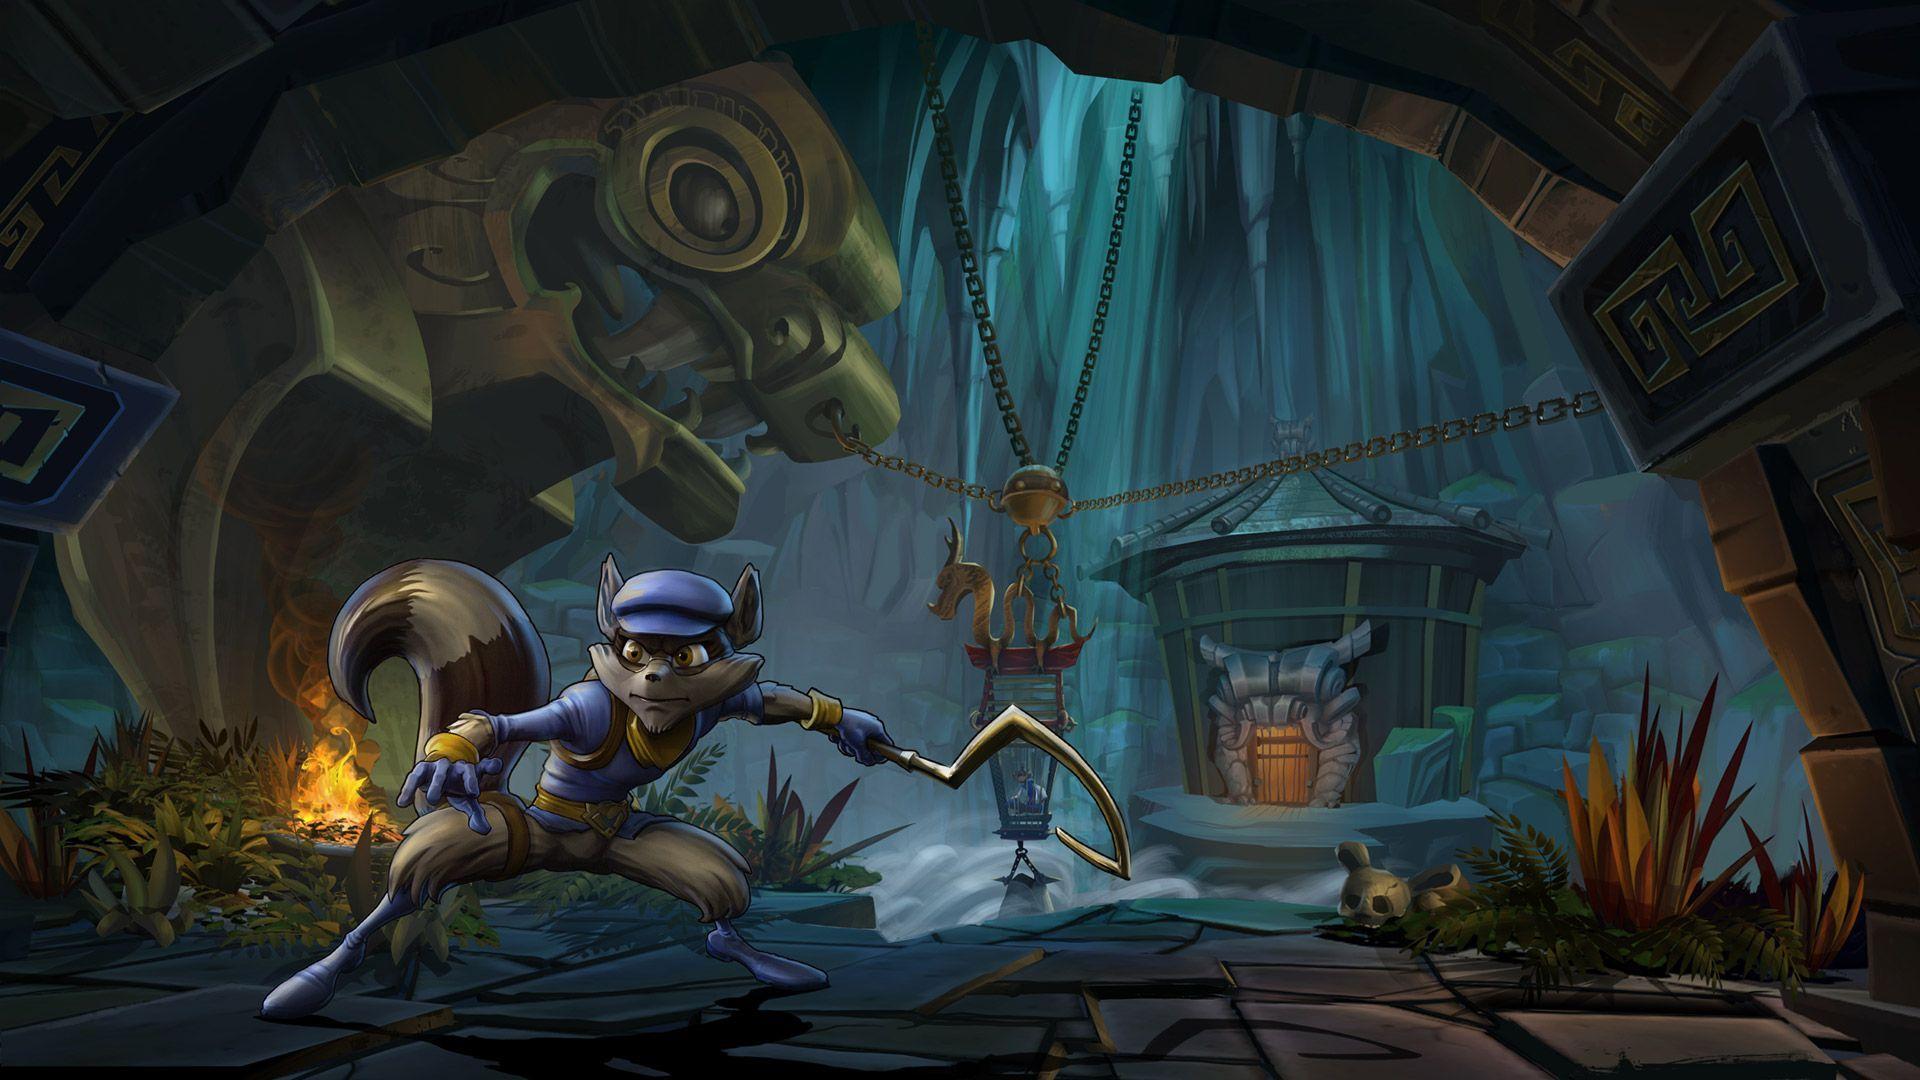 Free Sly Cooper: Thieves in Time Wallpapers in 1920x1080